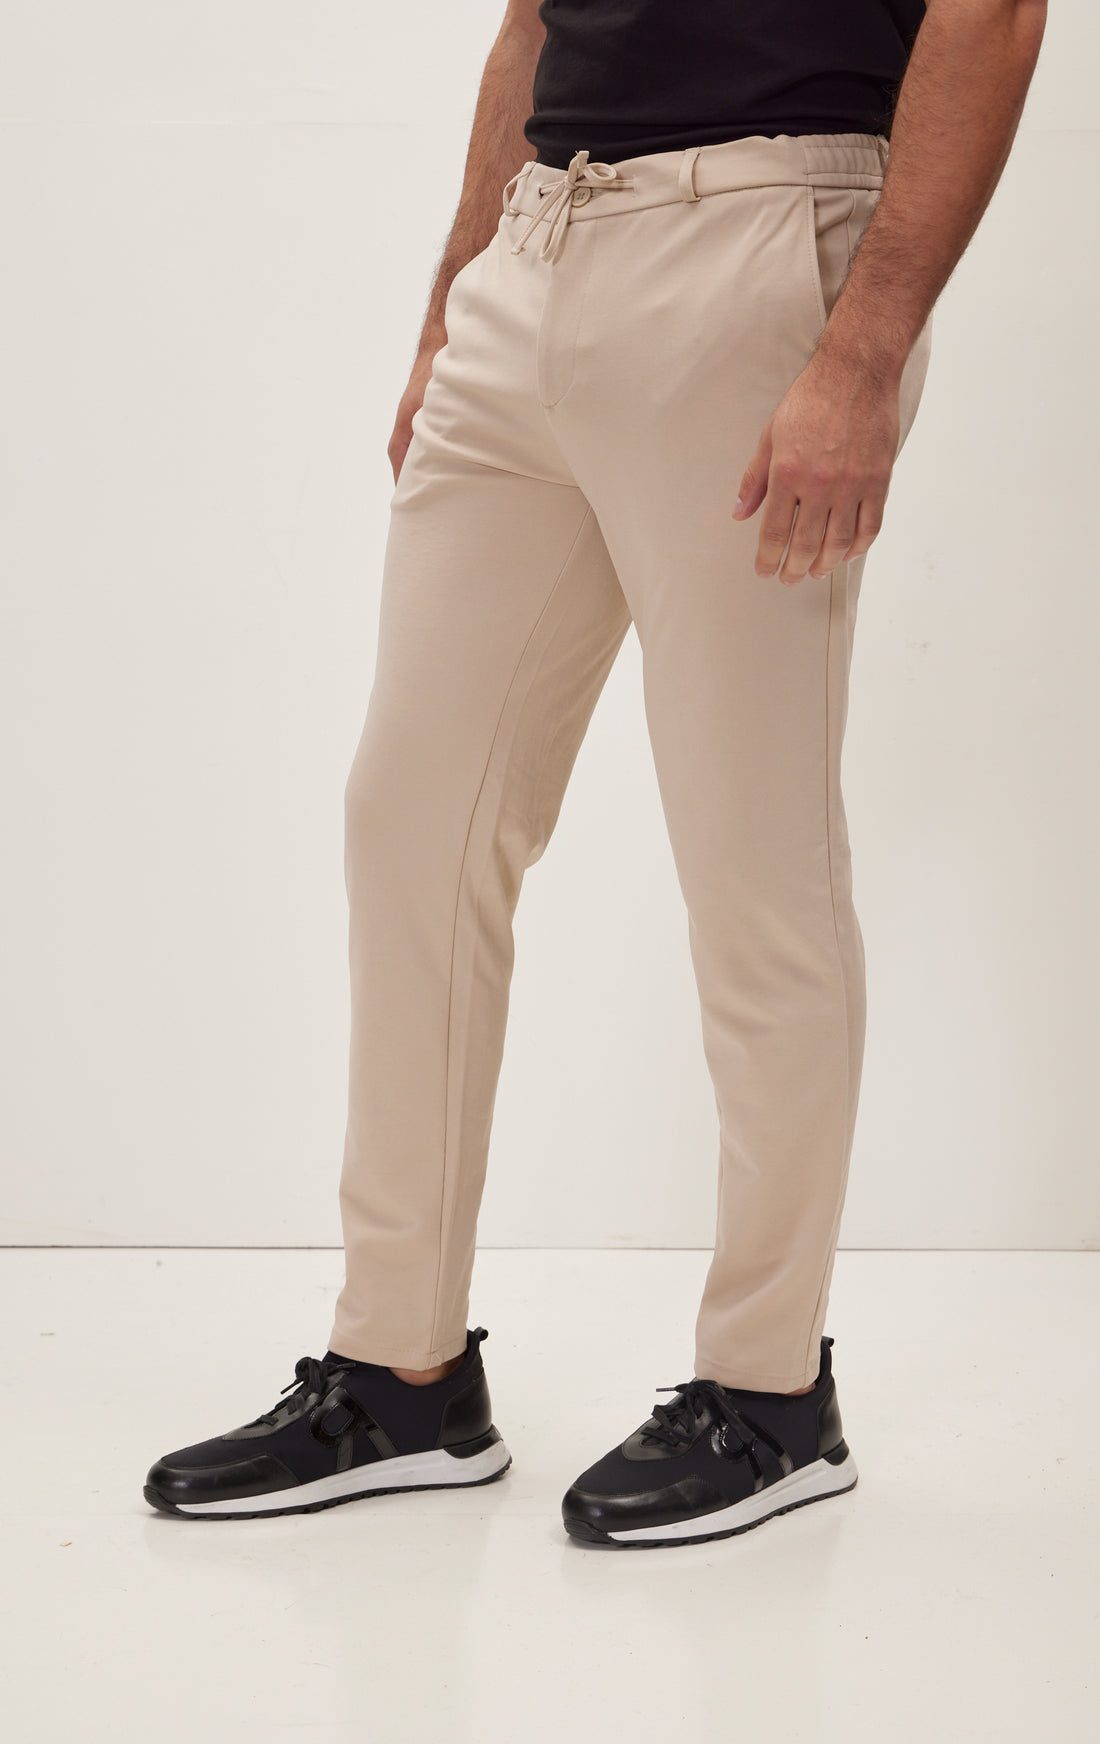 Fitted Casual Everyday Pants - Beige